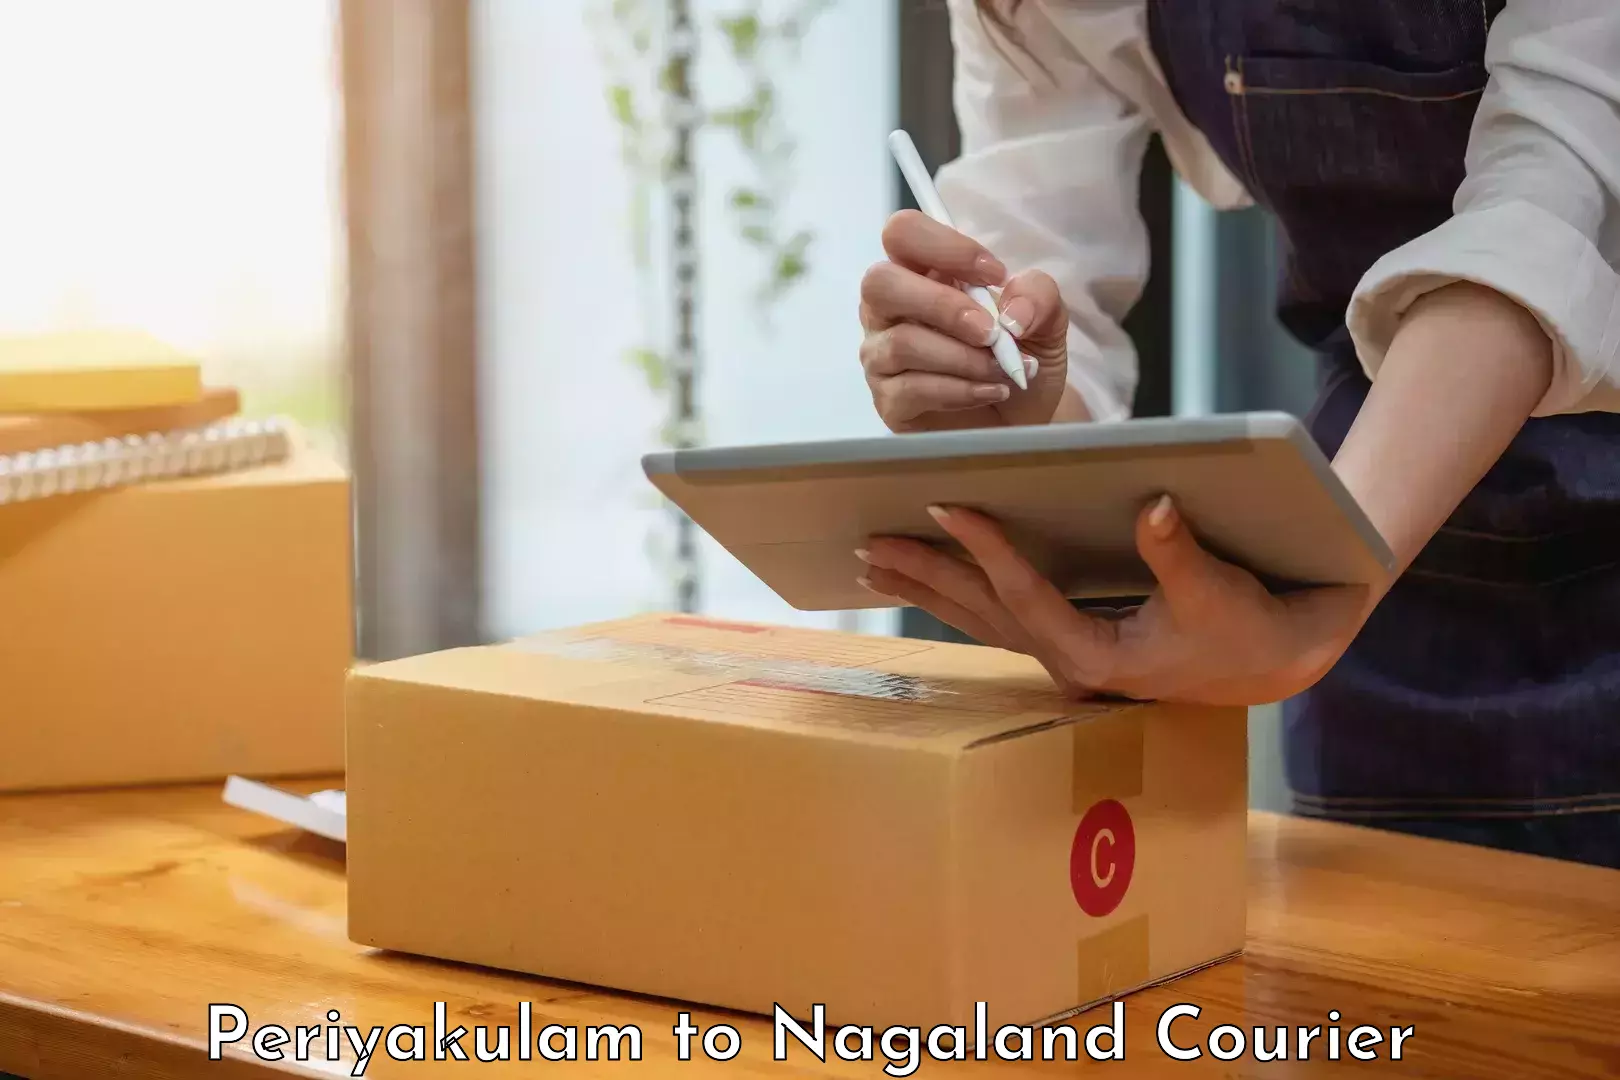 State-of-the-art courier technology in Periyakulam to Dimapur